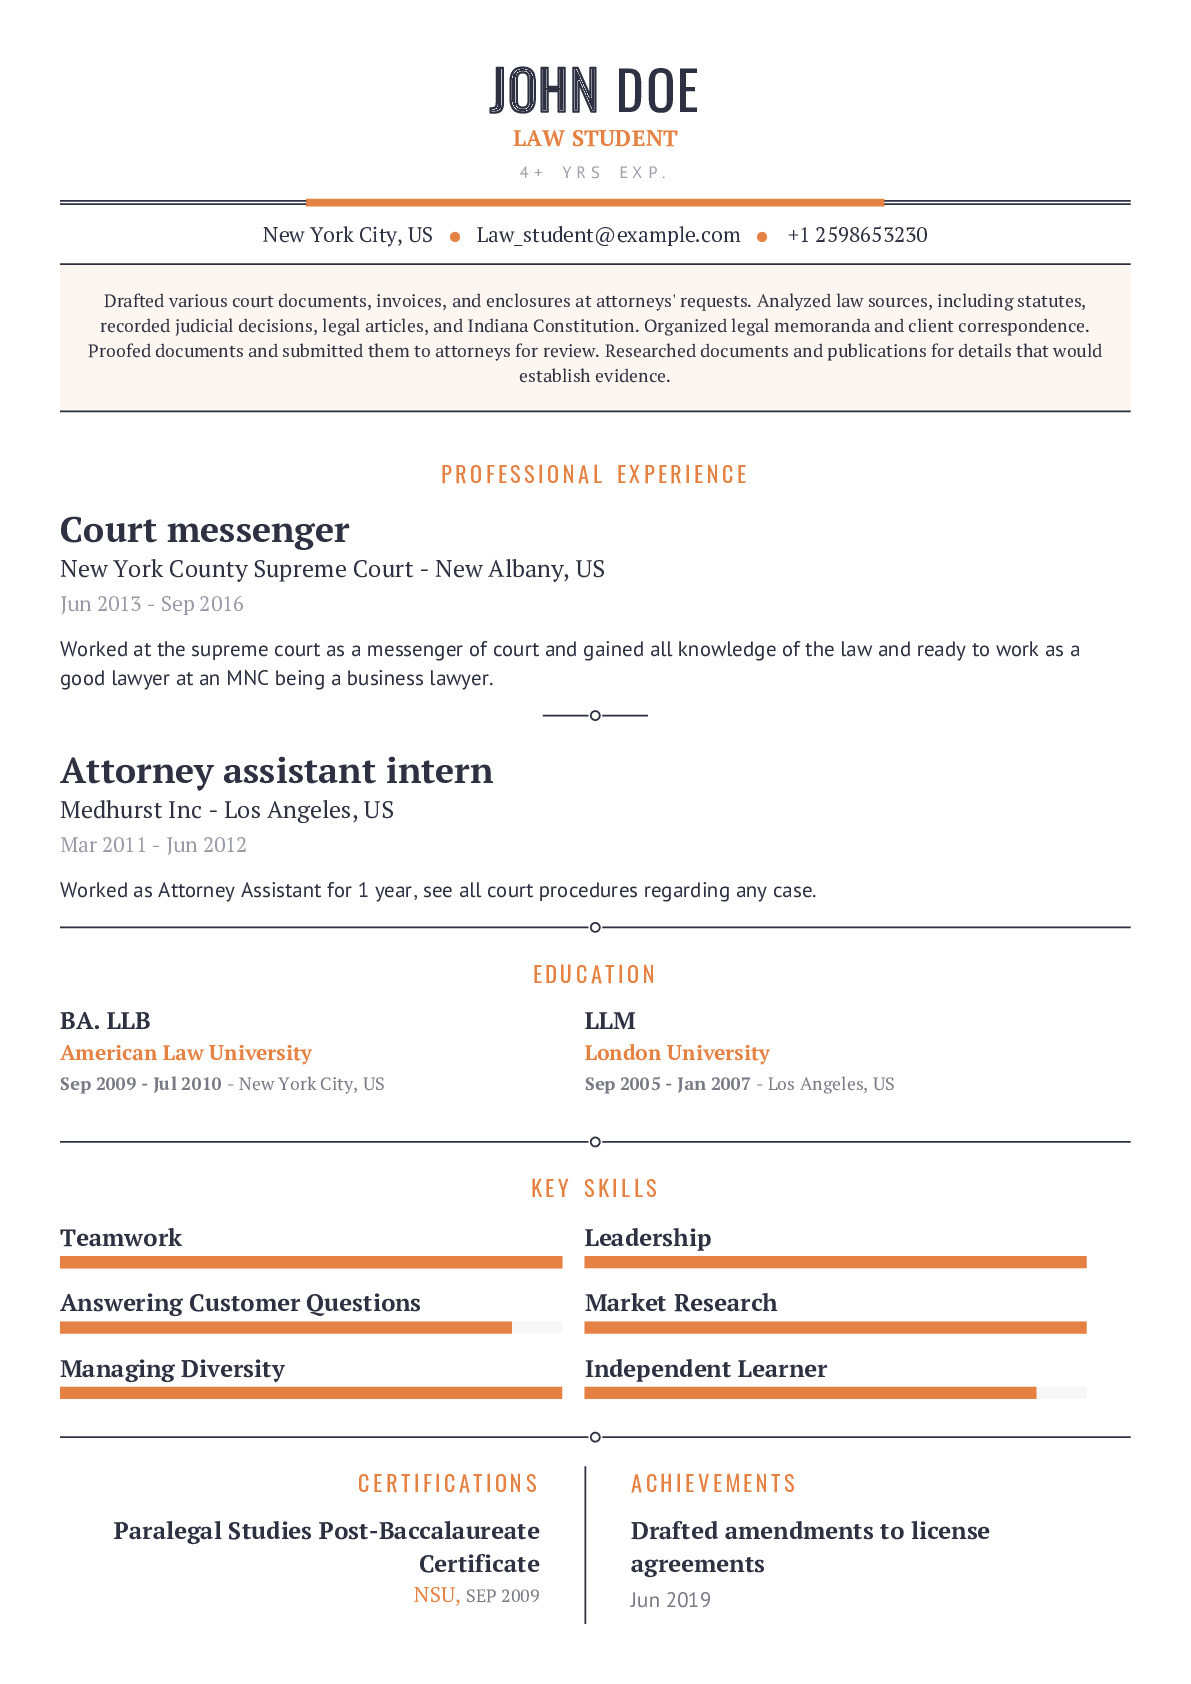 Sample Resume for Trial Legal Intern Law Student Resume Example with Content Sample Craftmycv